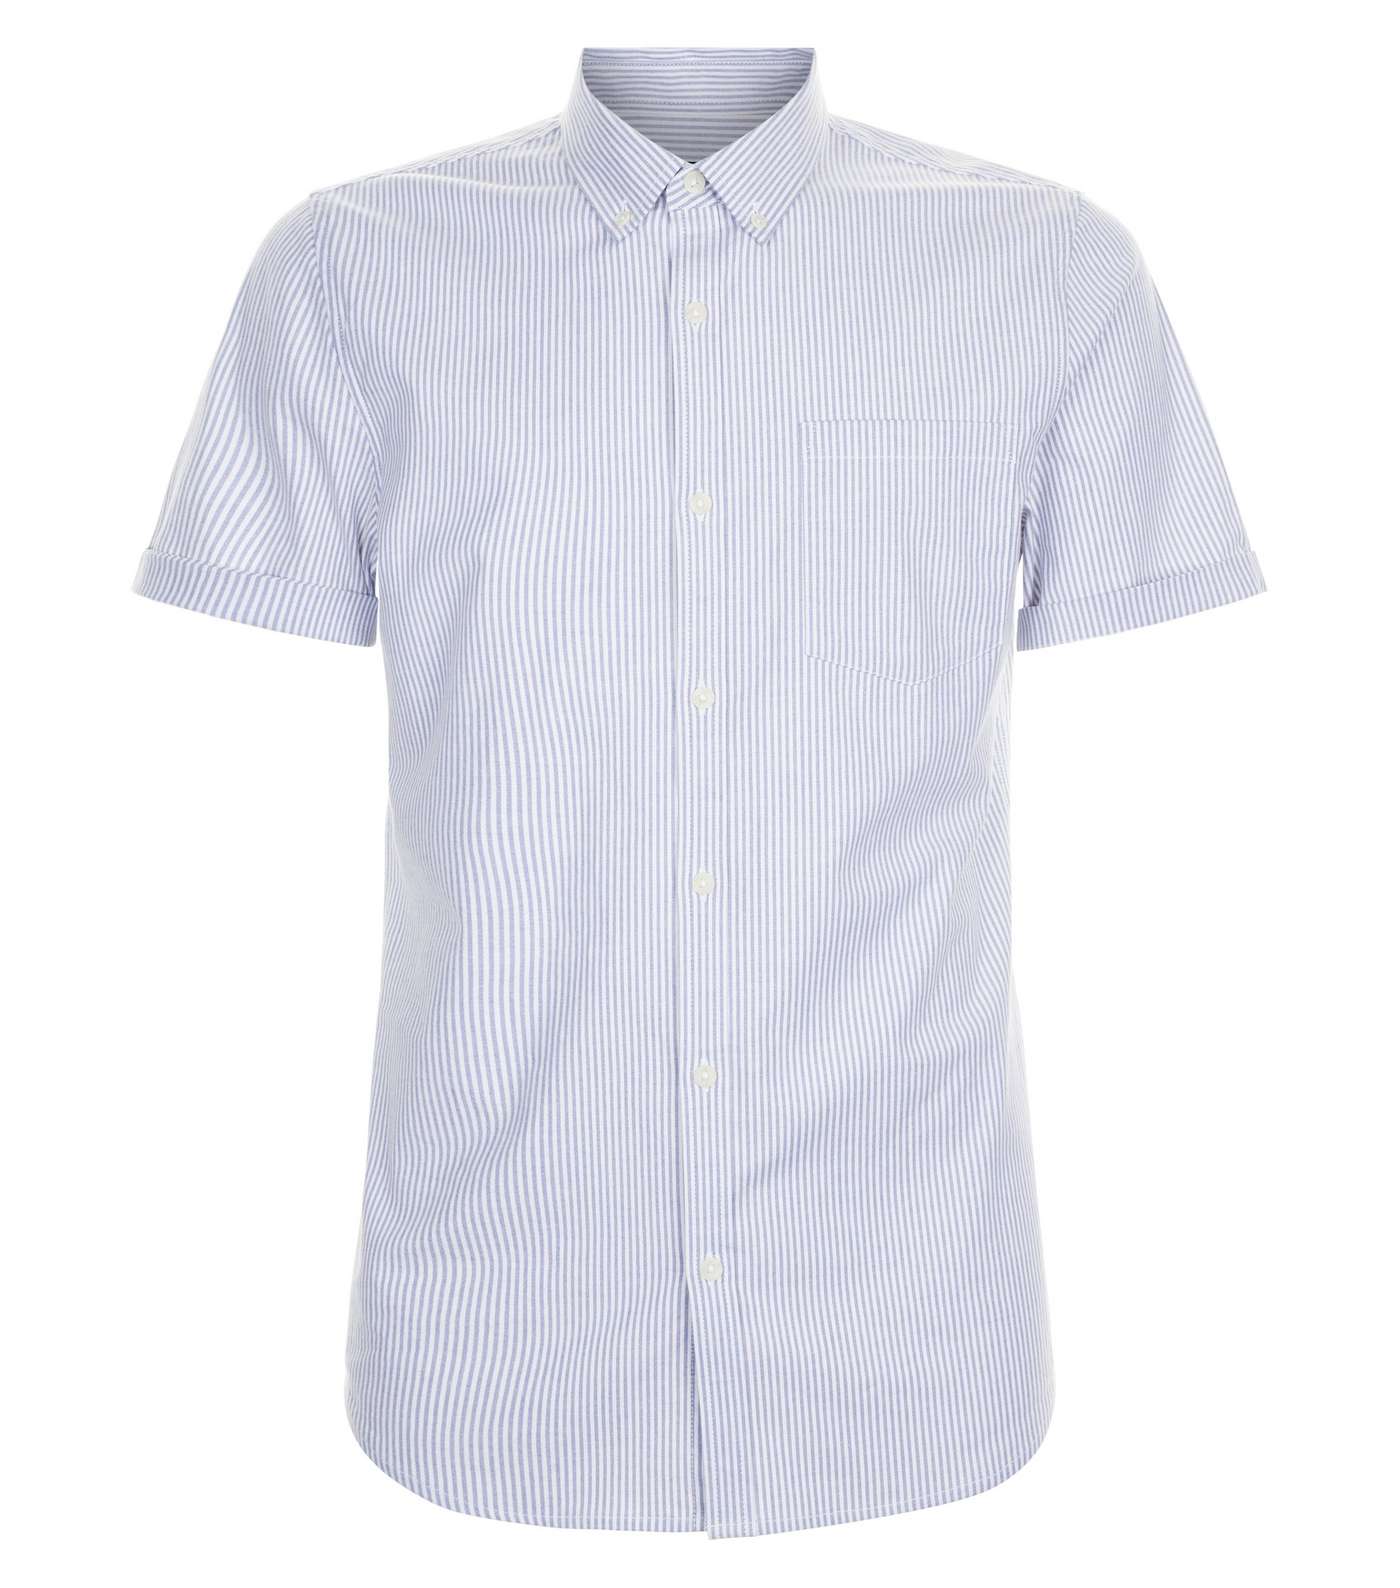 Blue Stripe Muscle Fit Oxford Shirt Image 4